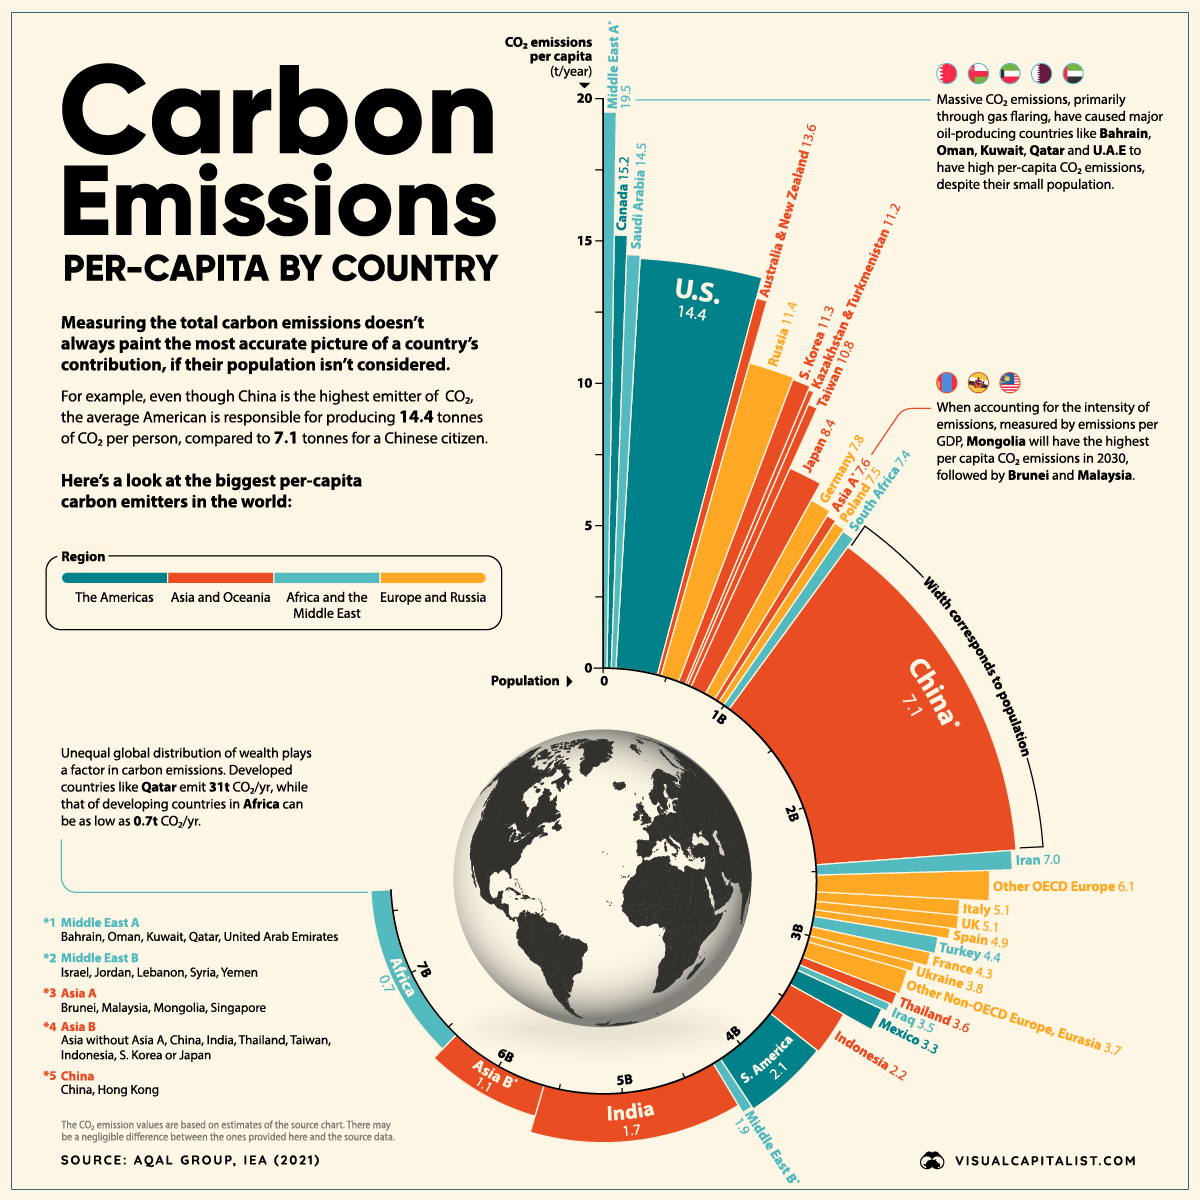 Calculating Carbon Emissions is Key to Improving Health